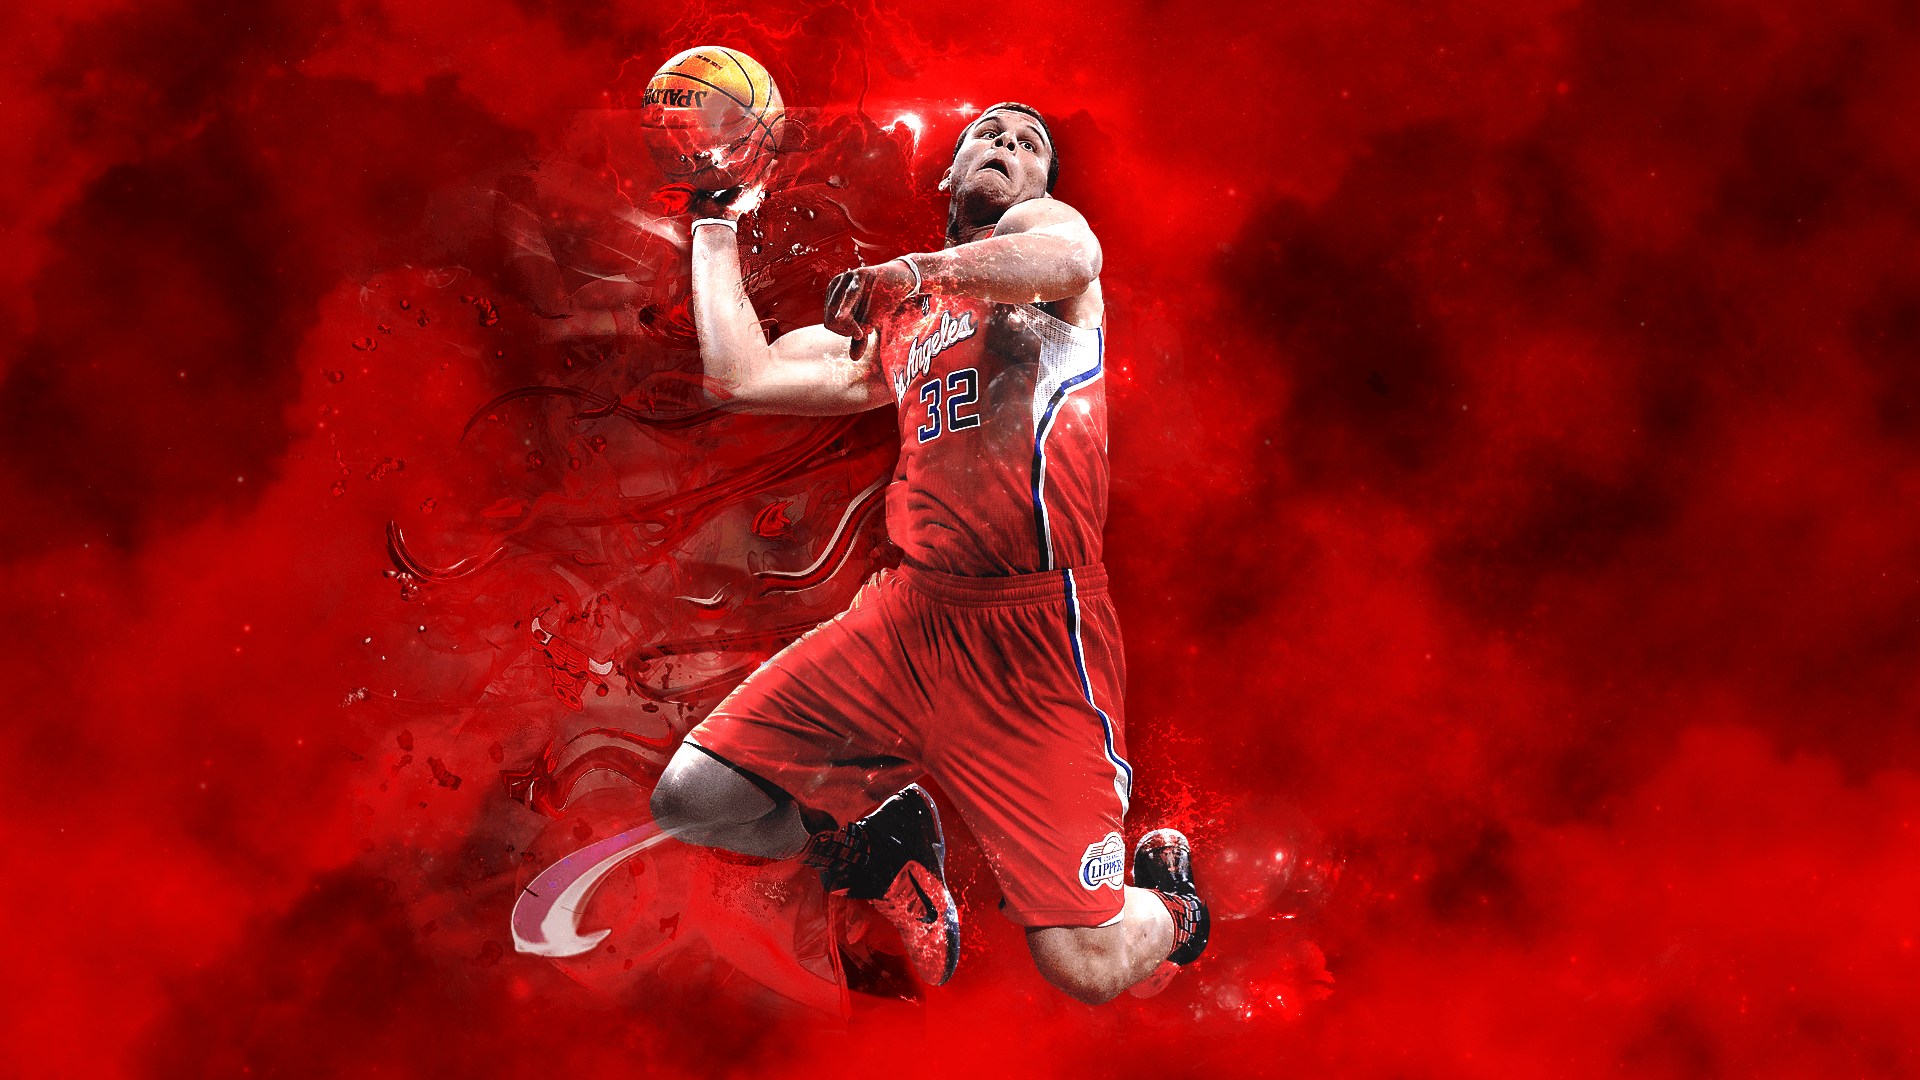 HD Blake Griffin Losangeles Clippers Wallpapers